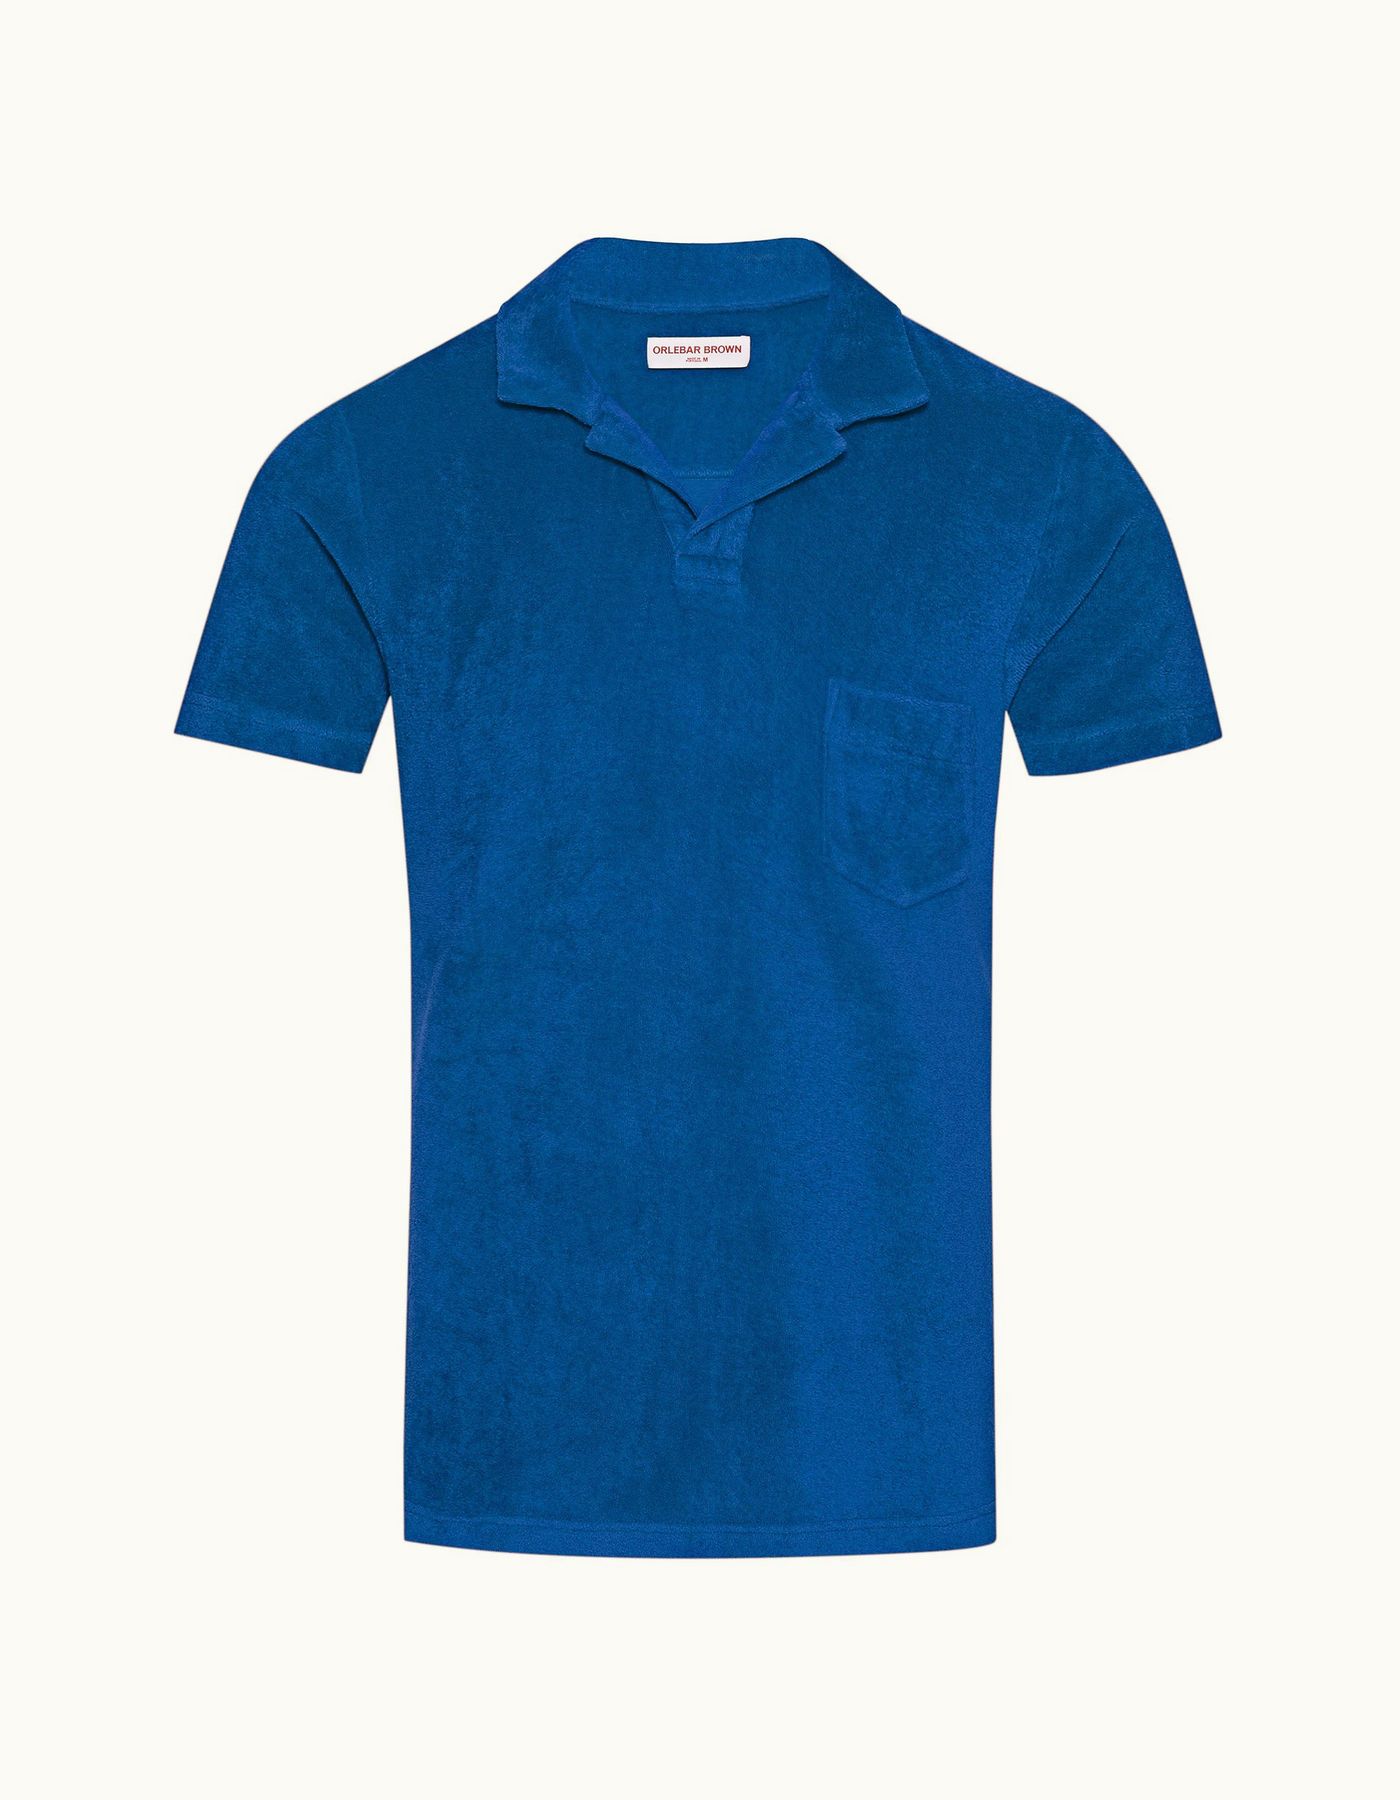 Terry Towelling - Mens Signal Blue Tailored Fit Towelling Resort Polo Shirt